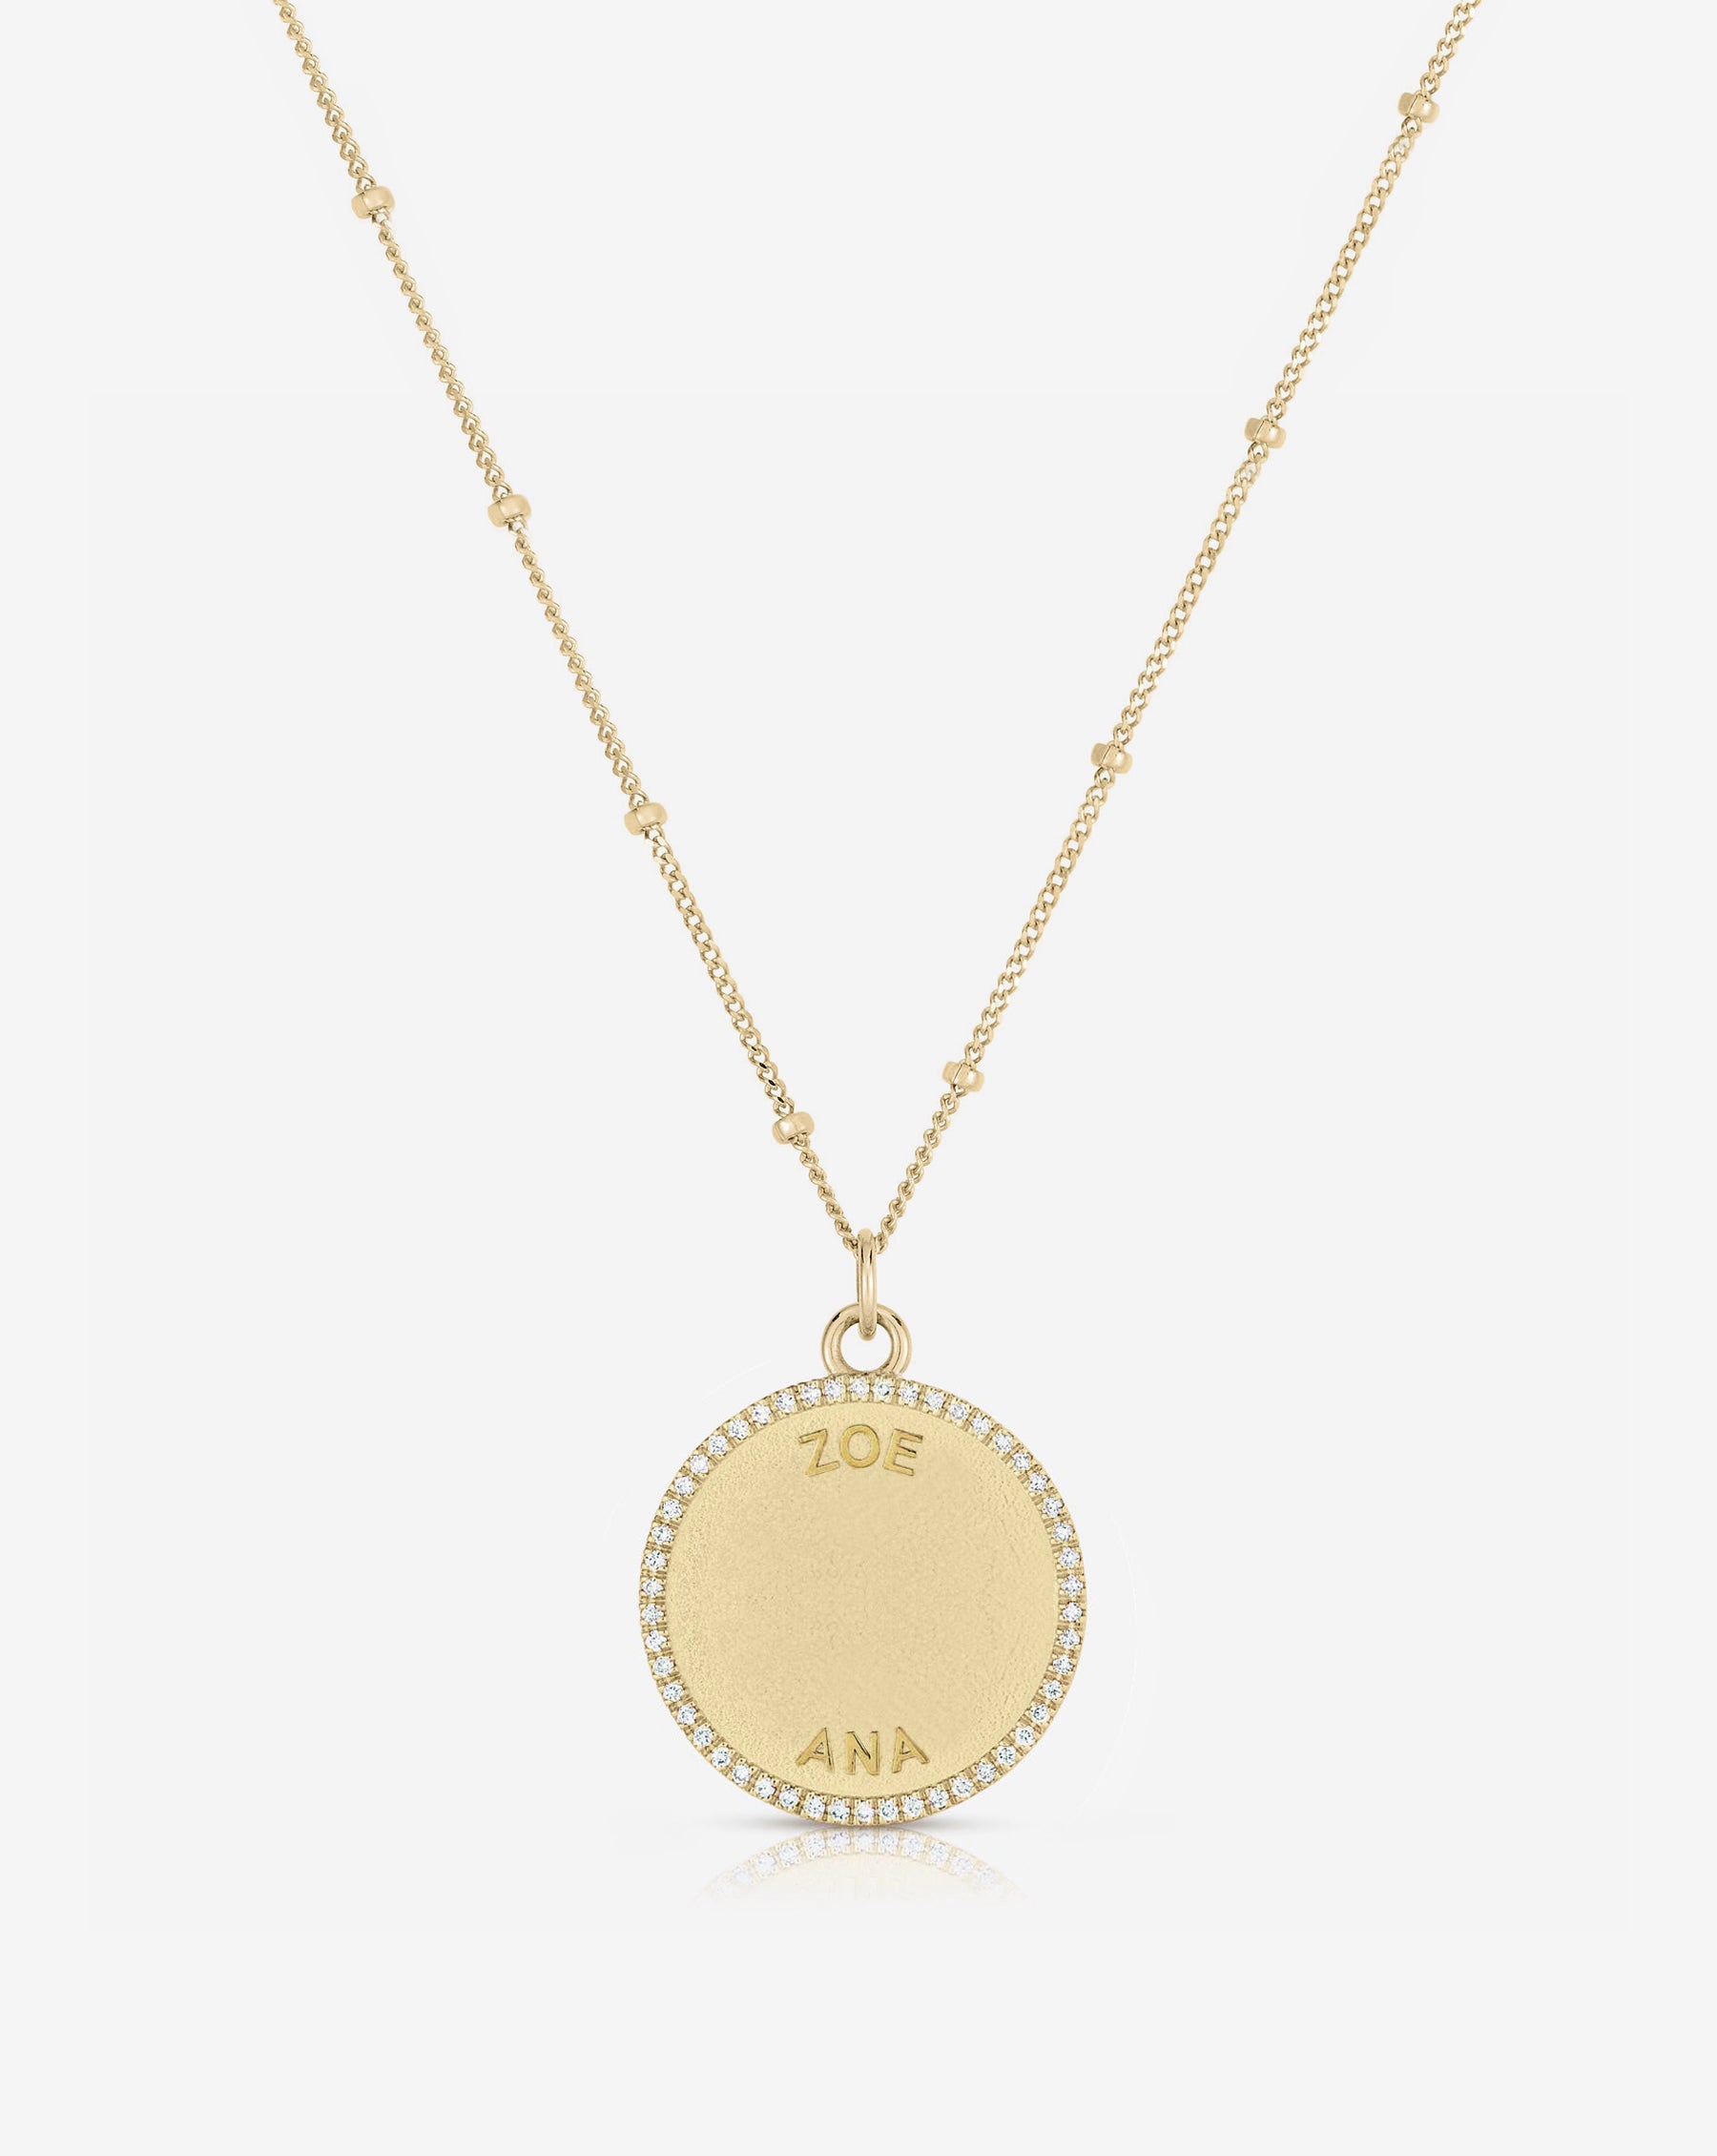 Custom Gold Jewelry | Personalized Gold Jewelry | Baby Gold